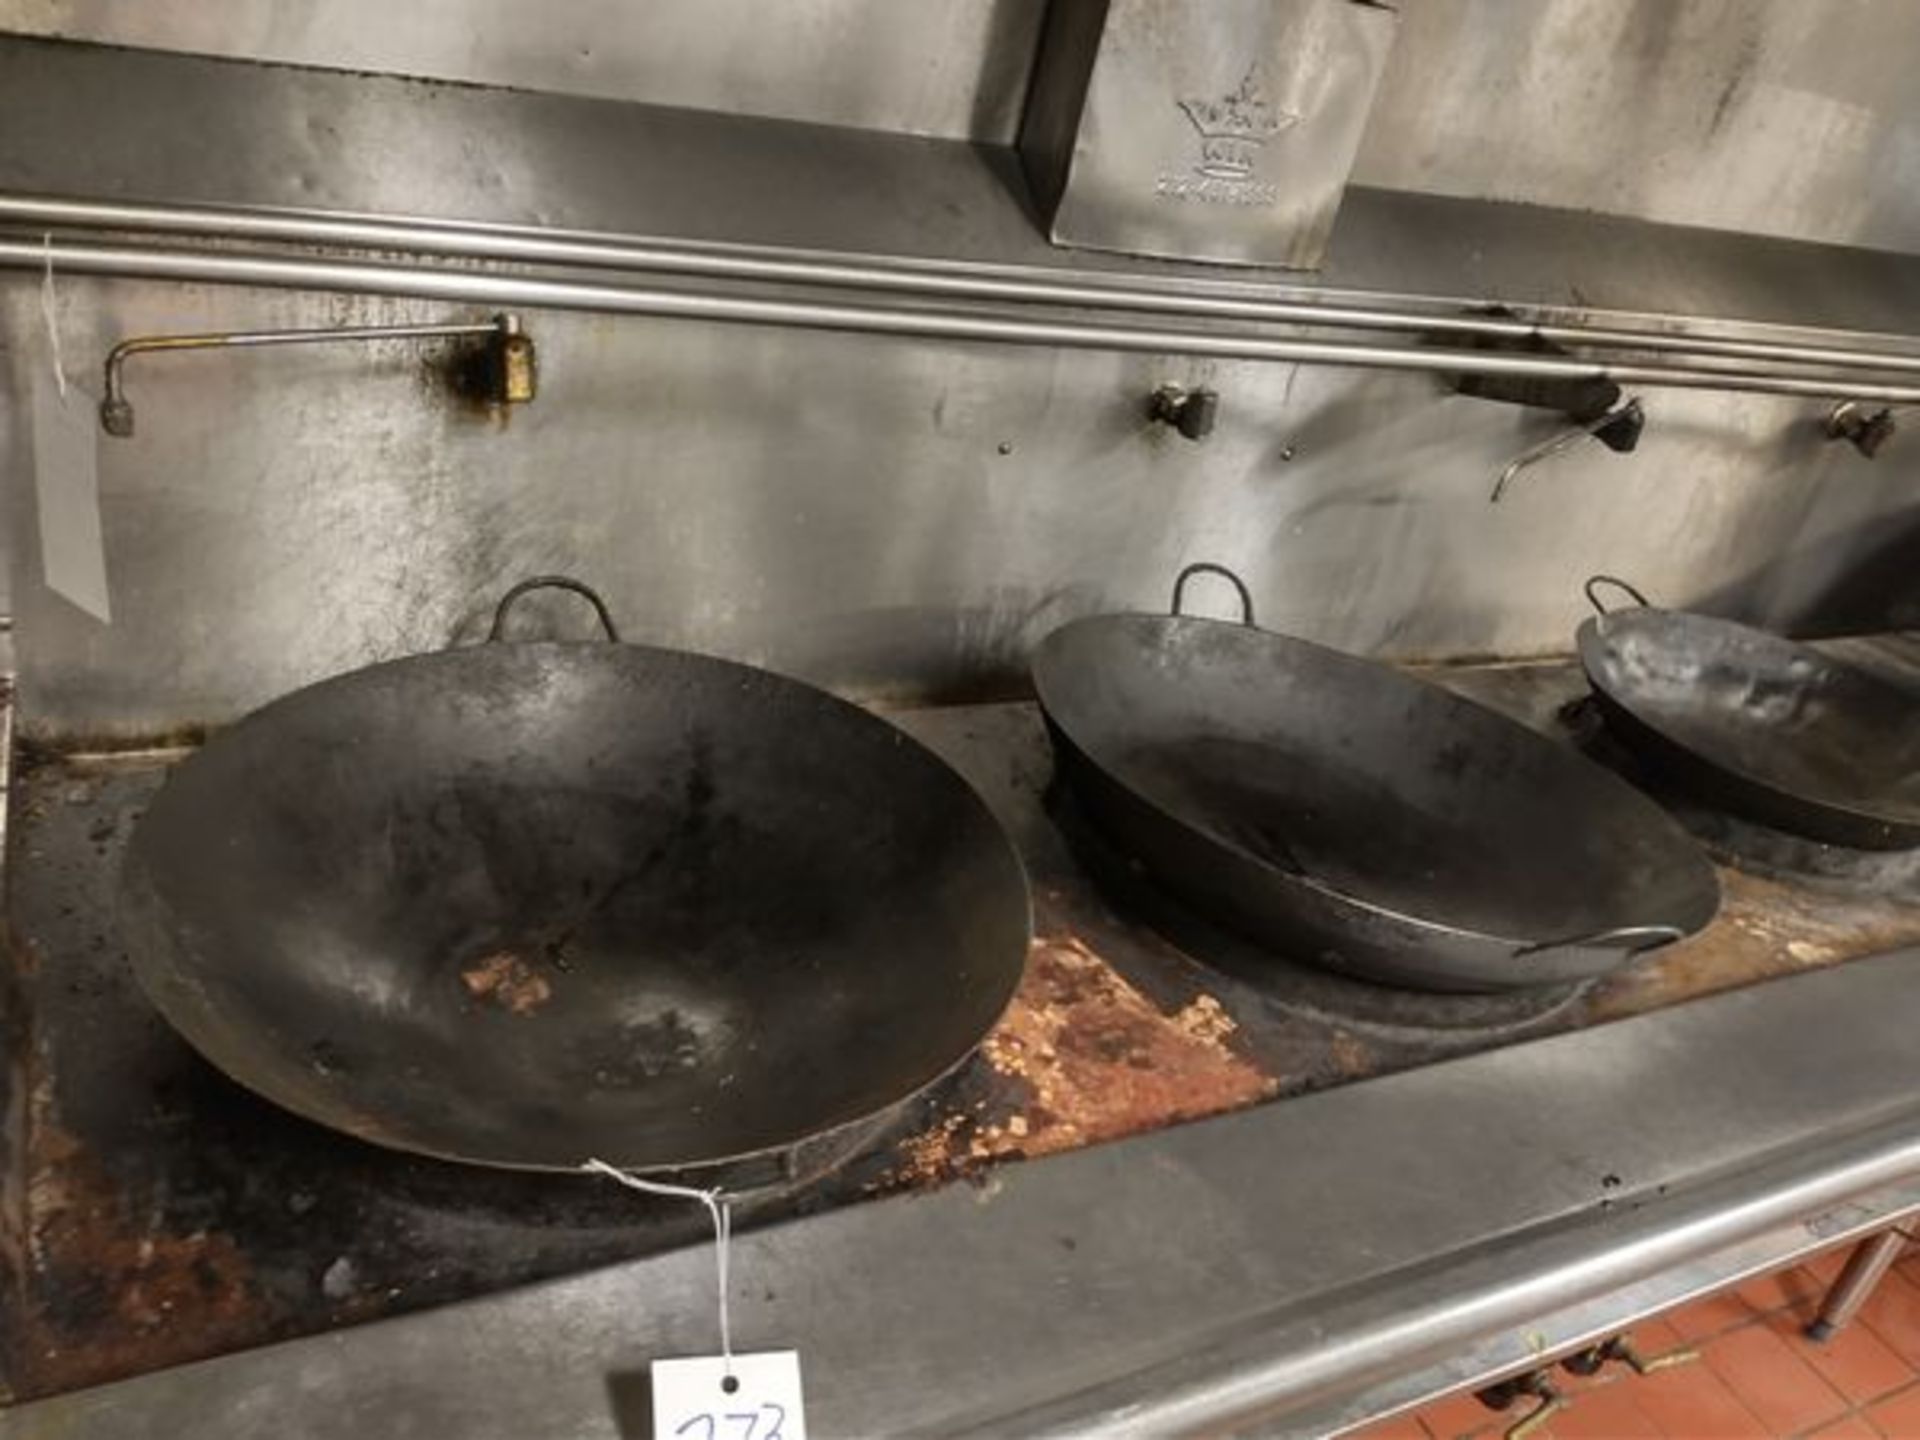 LOT OF 6 WOK COOKING PANS - Image 2 of 4